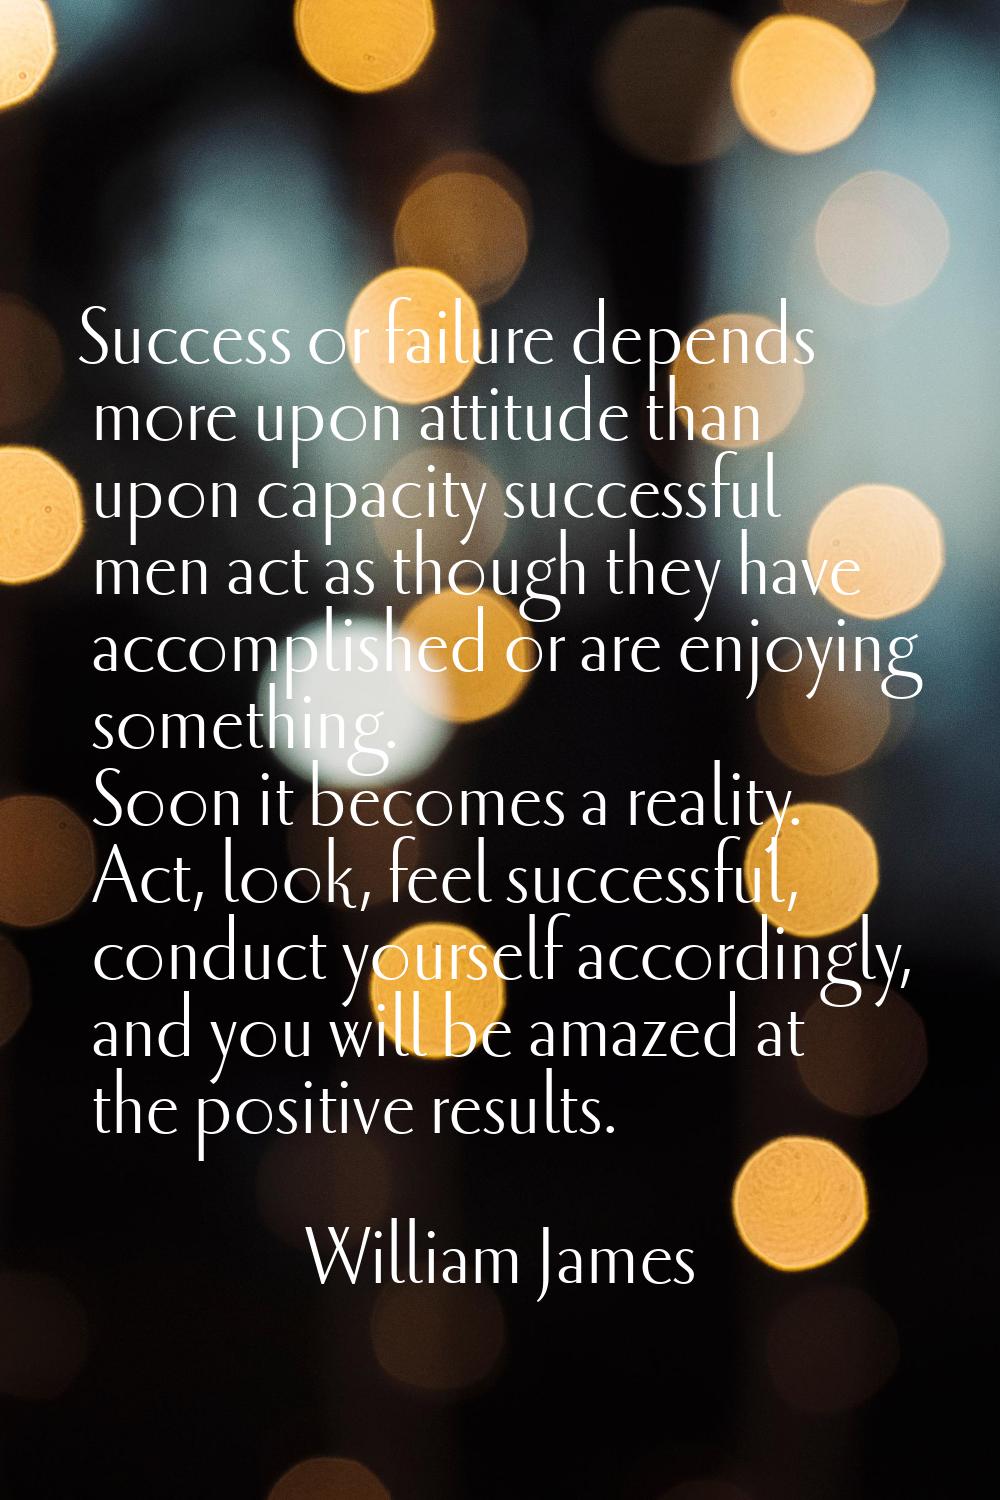 Success or failure depends more upon attitude than upon capacity successful men act as though they 